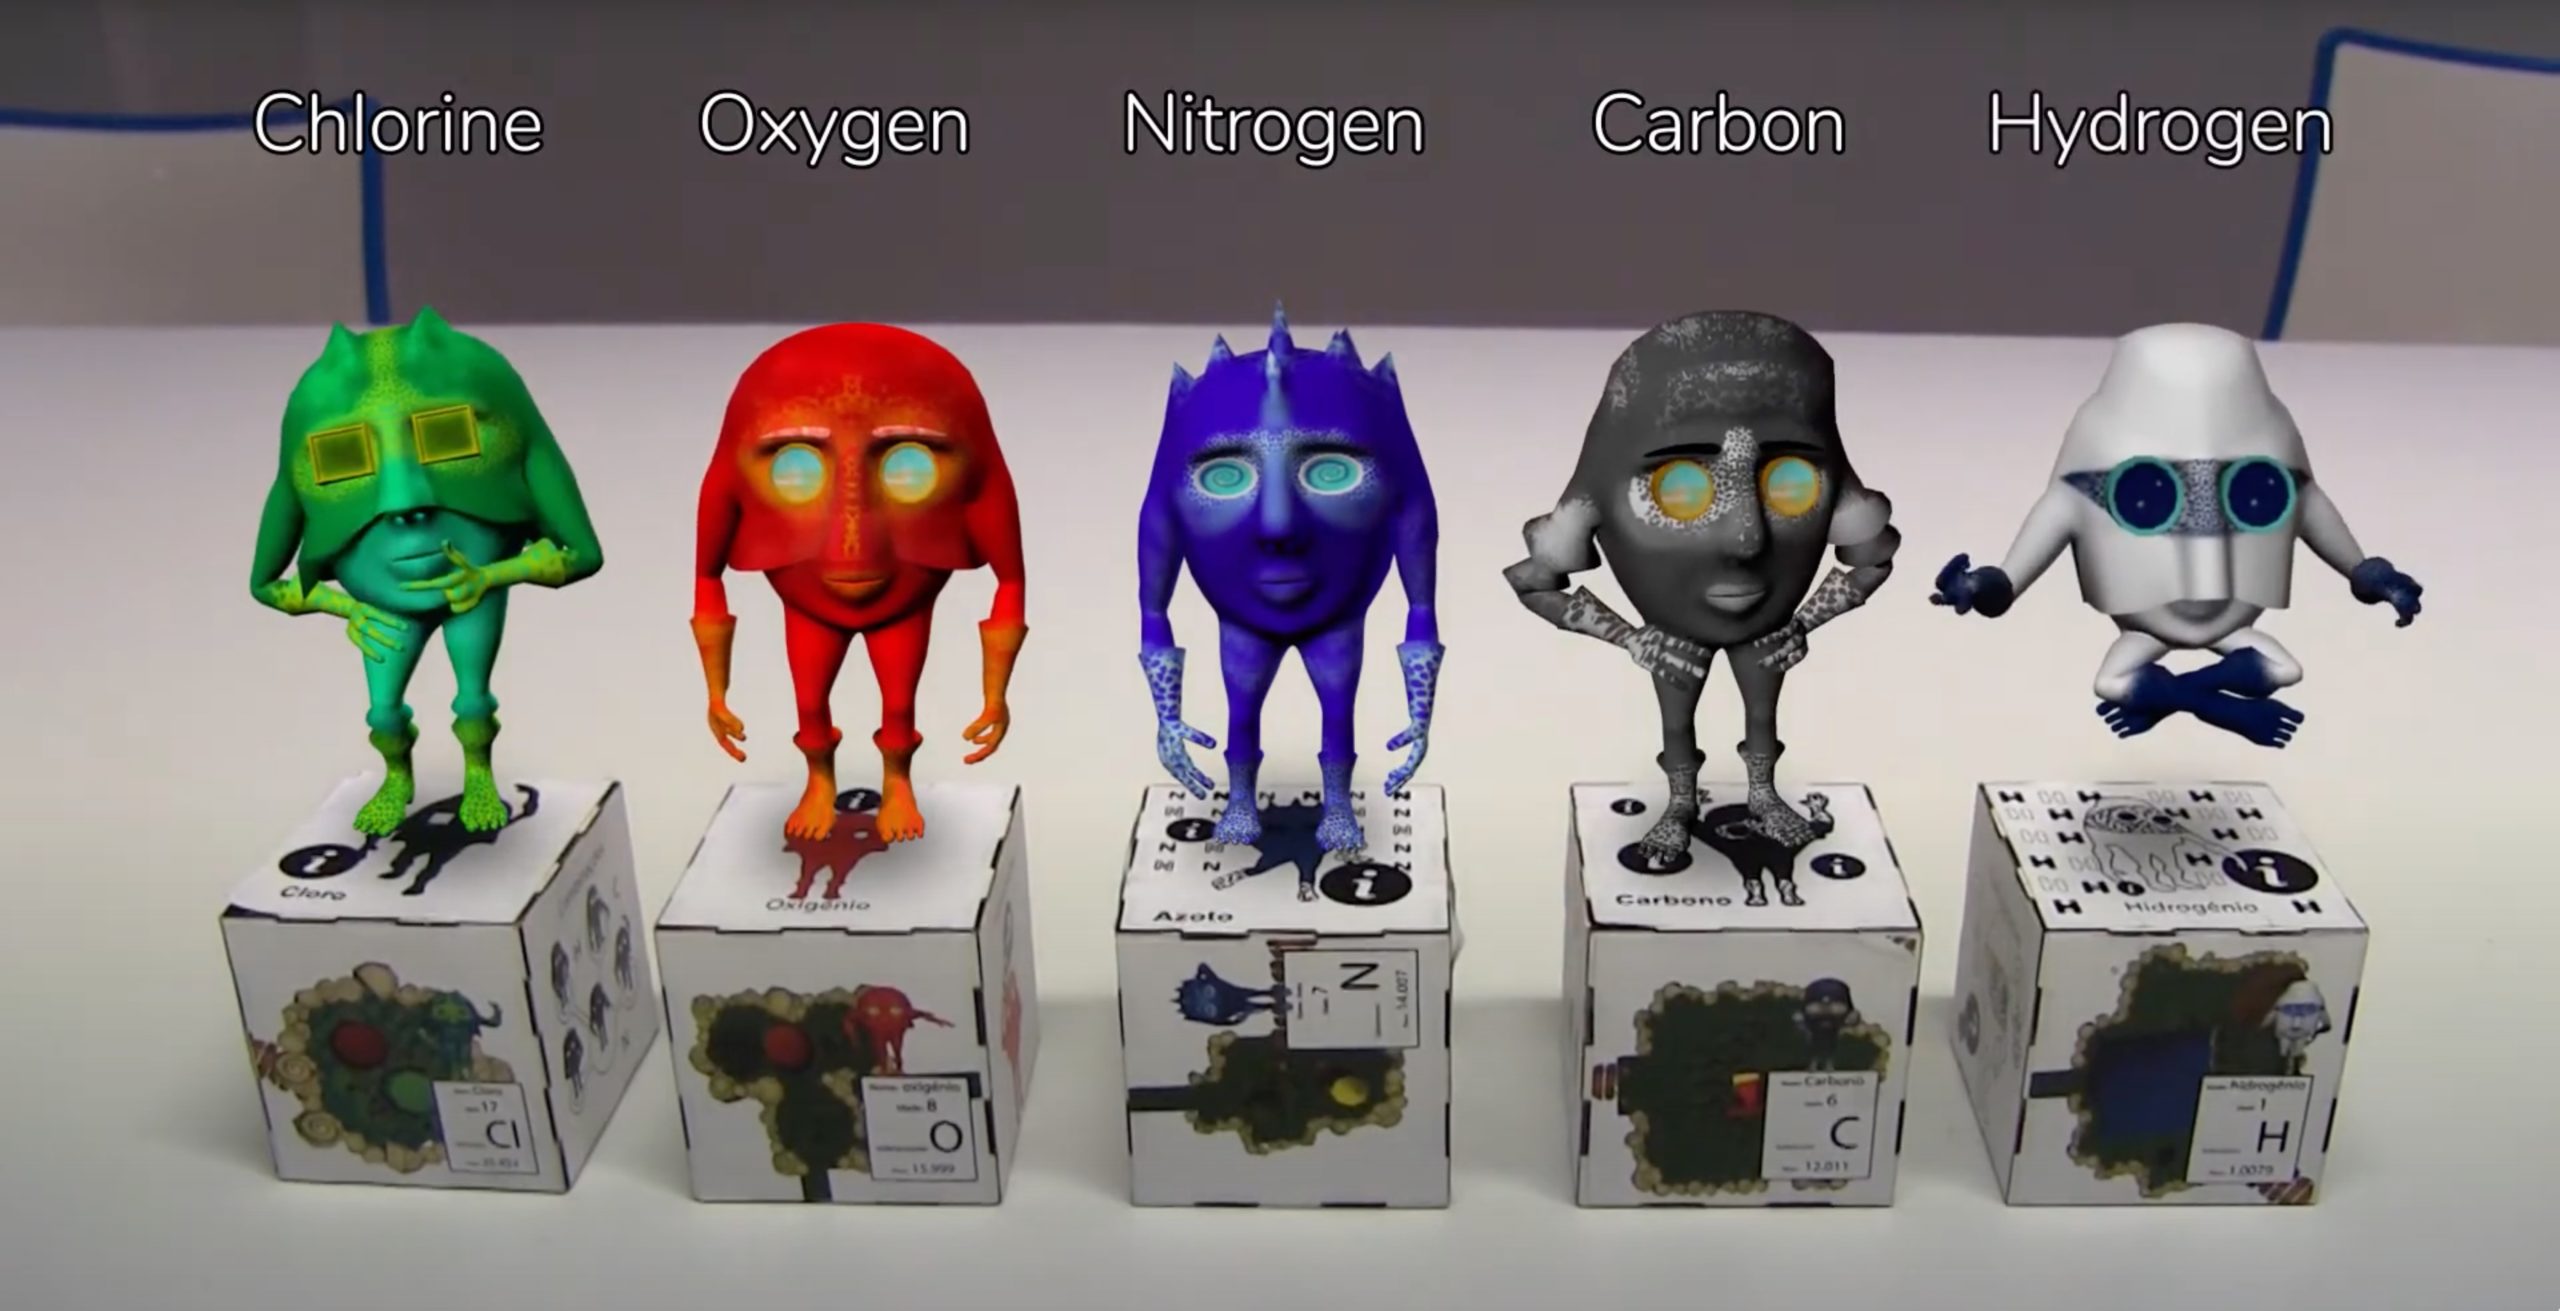 We developed an augmented reality game to teach chemistry